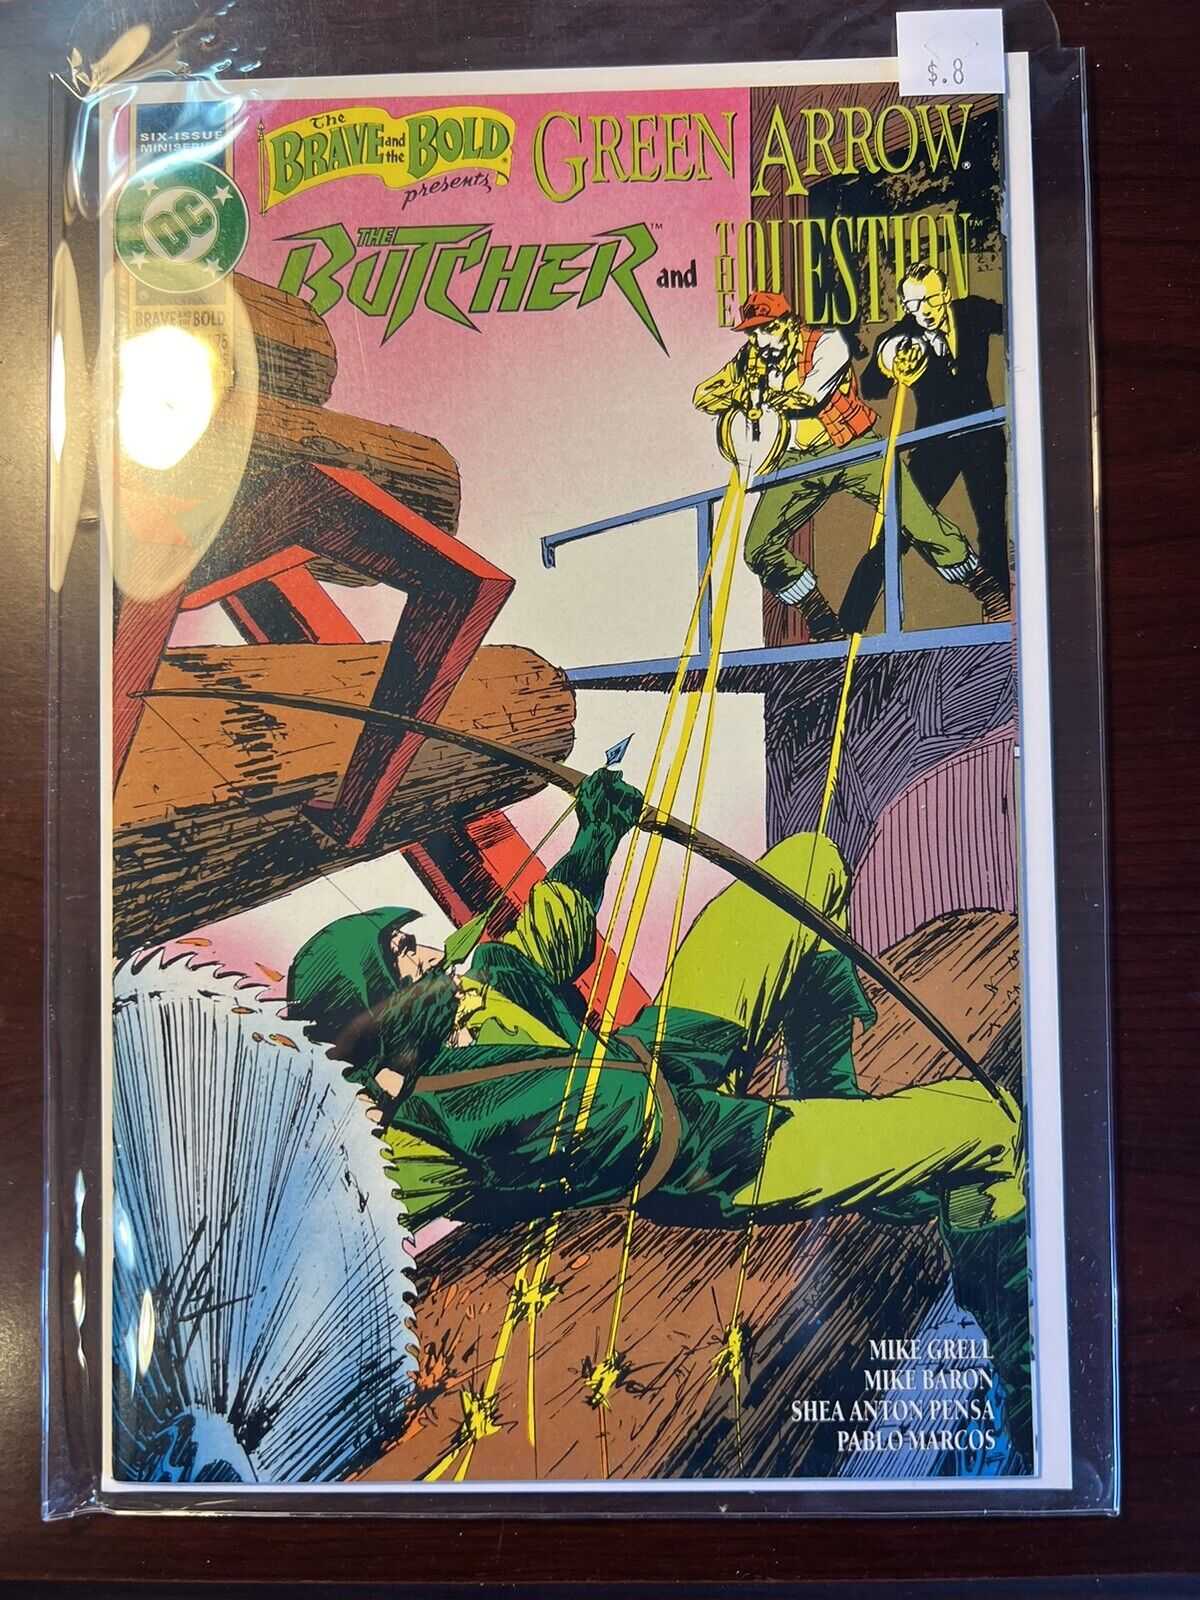 Brave and the Bold #5 DC Comics 1992 Green Arrow 🔥COMBINED SHIPPING